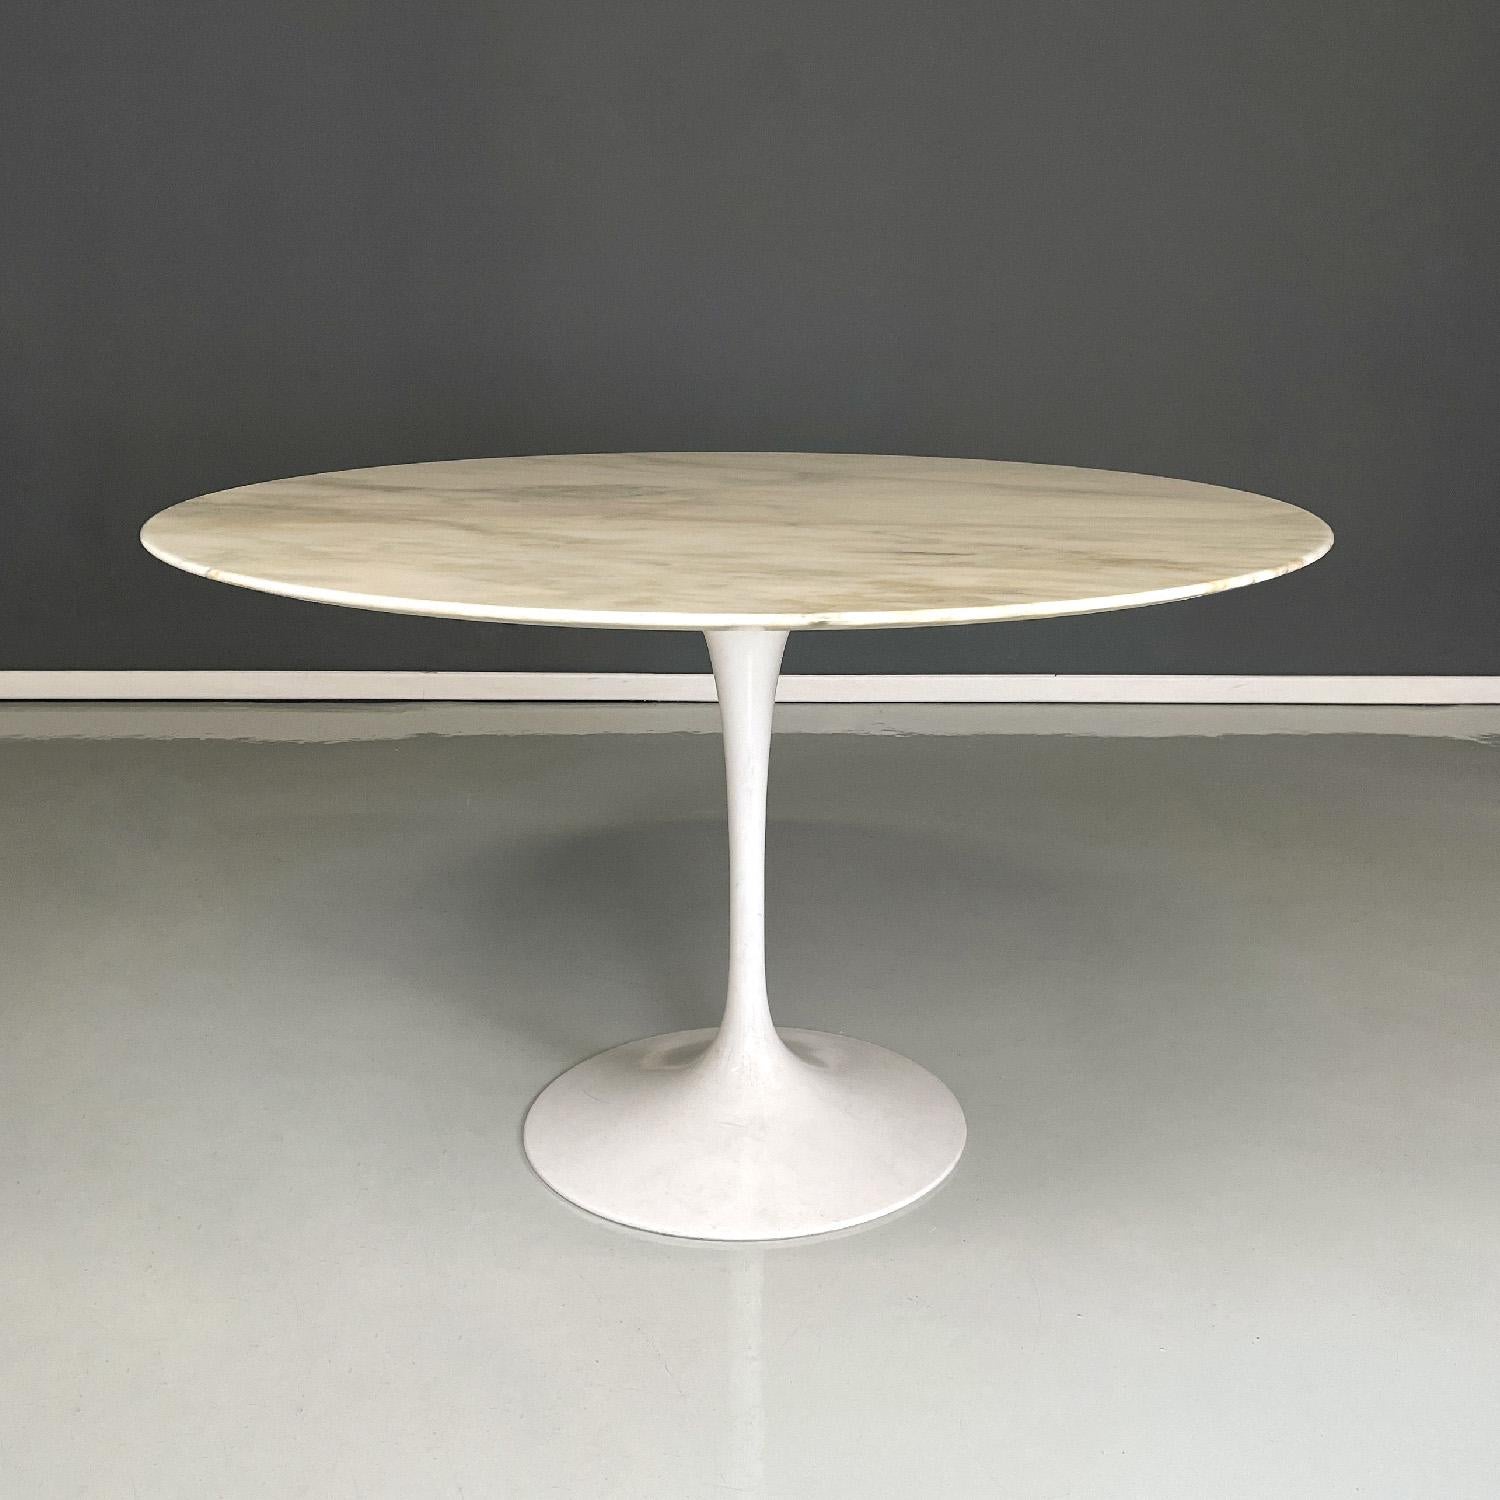 American mid-century modern dining table Tulip by Eero Saarinen for Knoll, 1960s
Dining table mod. Tulip with round top in white marble. The base is composed of a central paw in white painted metal which widens when it rests on the ground.
Made by